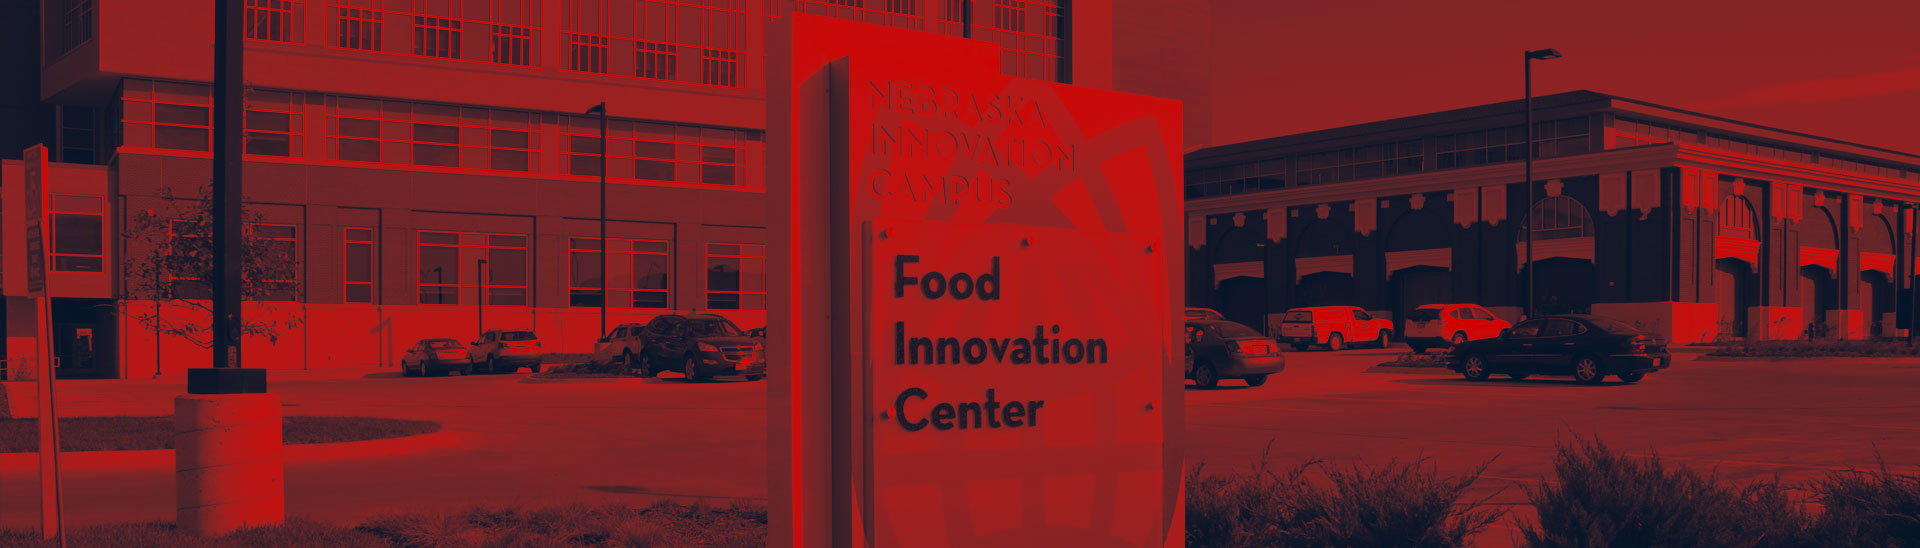 The west side of the Food Innovation Center